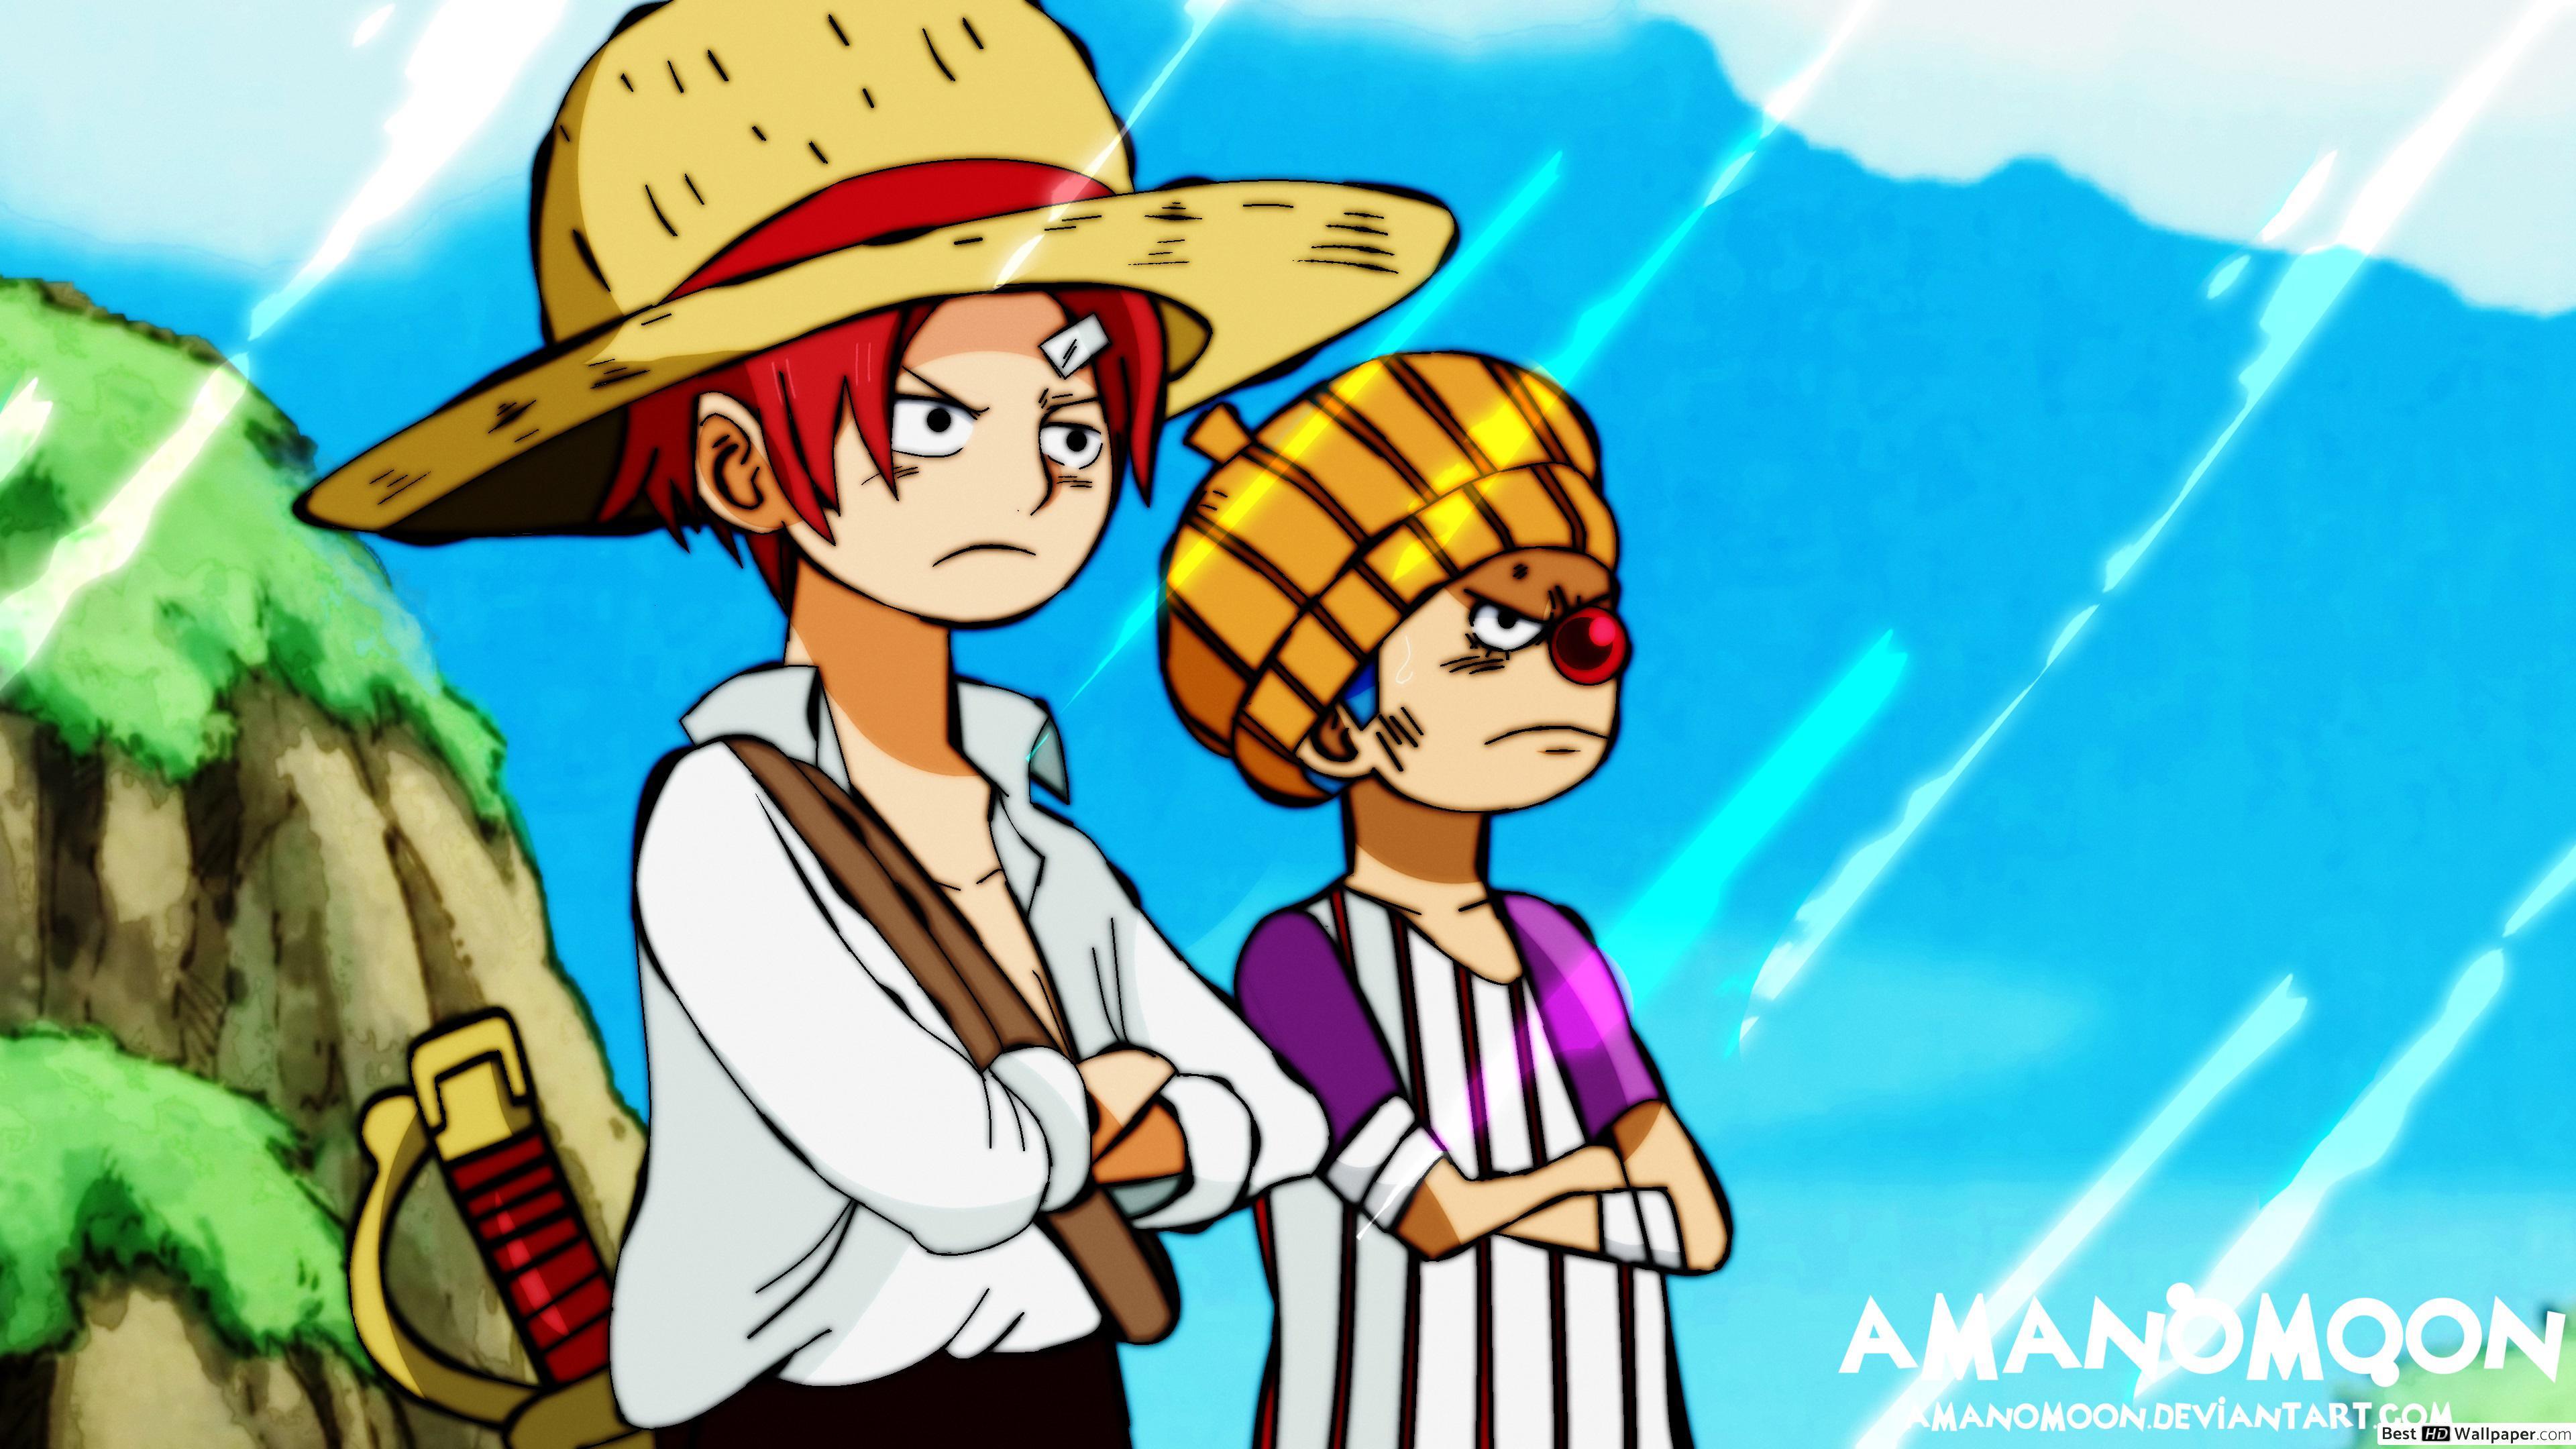 Buggy Wallpaper Download, One Piece, Anime